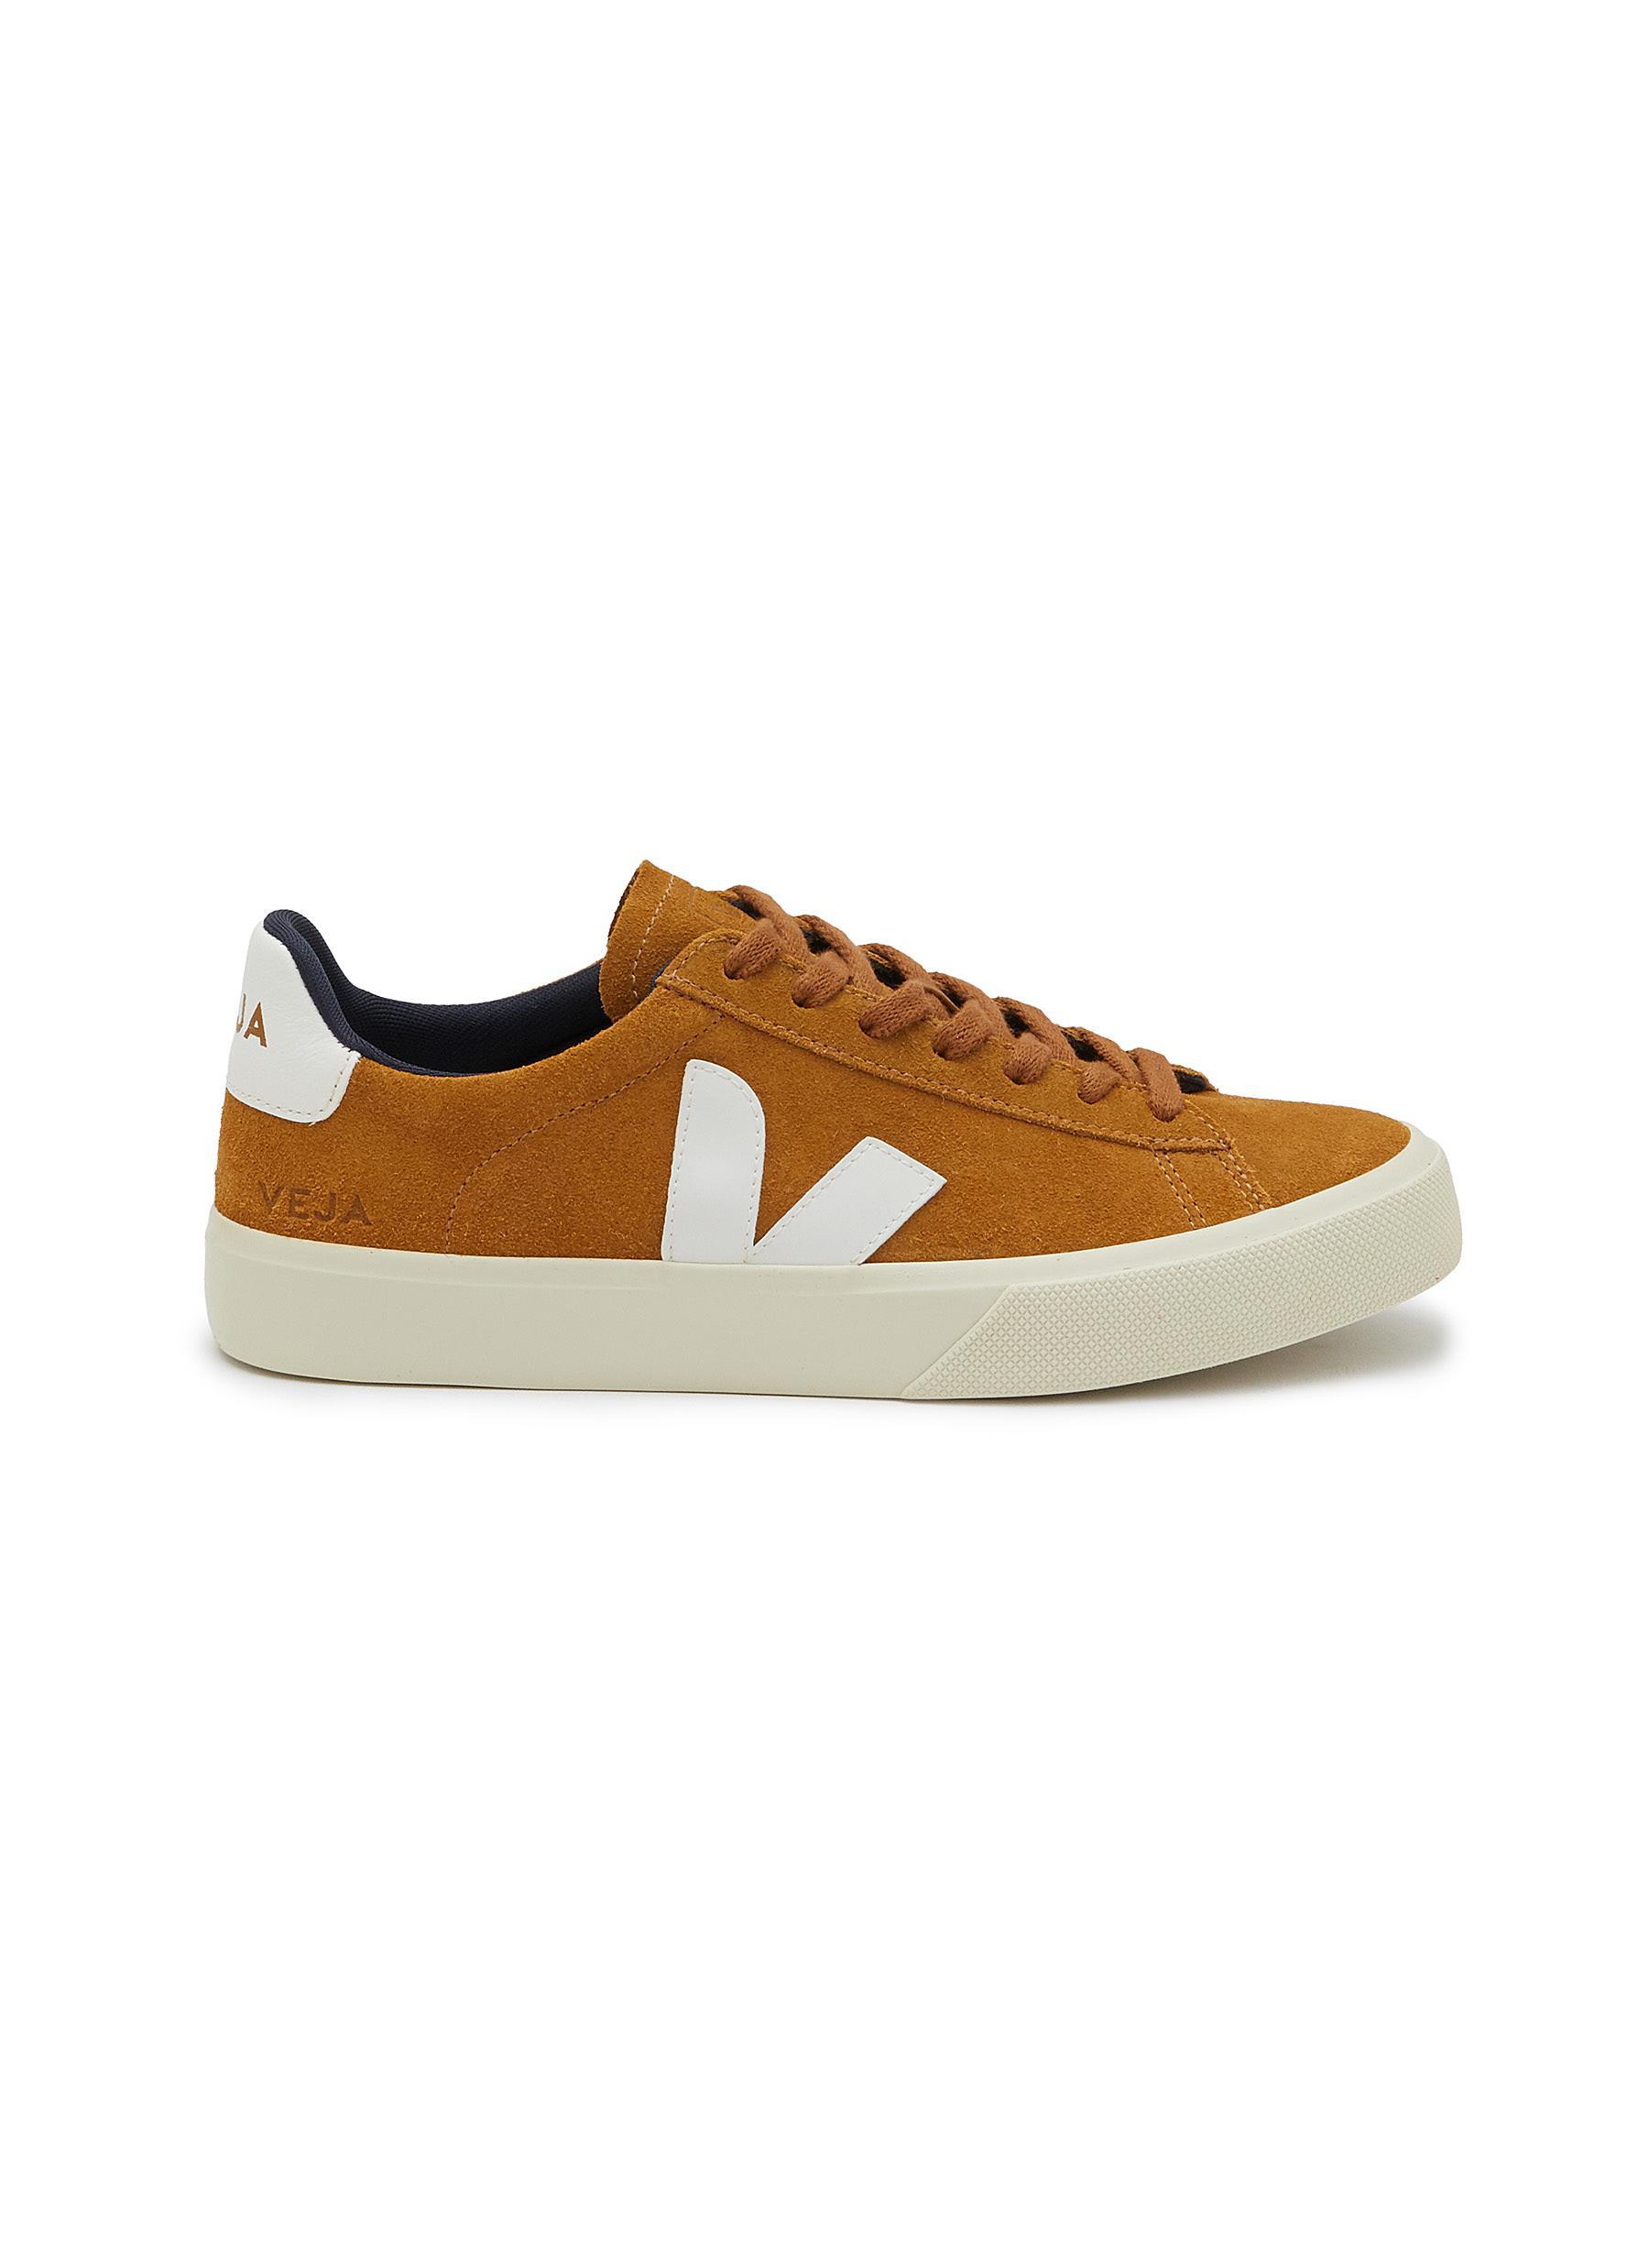 Veja 'campo' Suede Low Top Lace Up Sneakers in Brown | Lyst